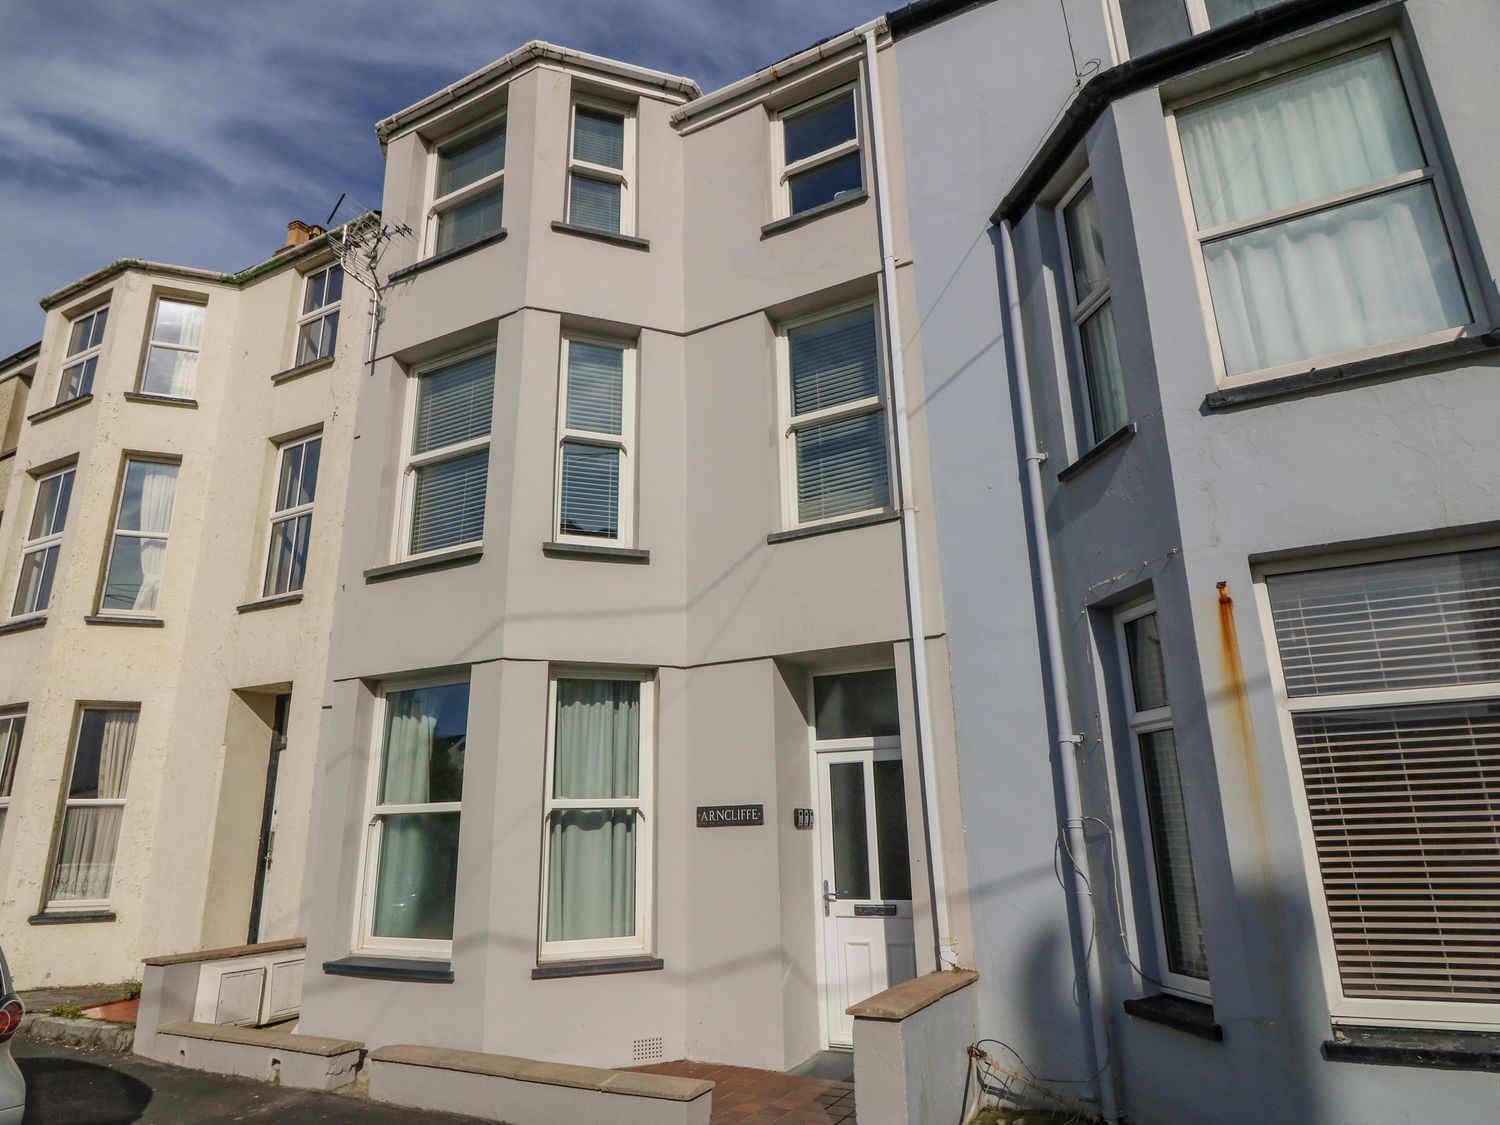 Y Castell Apartment 1 - North Wales - 926578 - photo 1